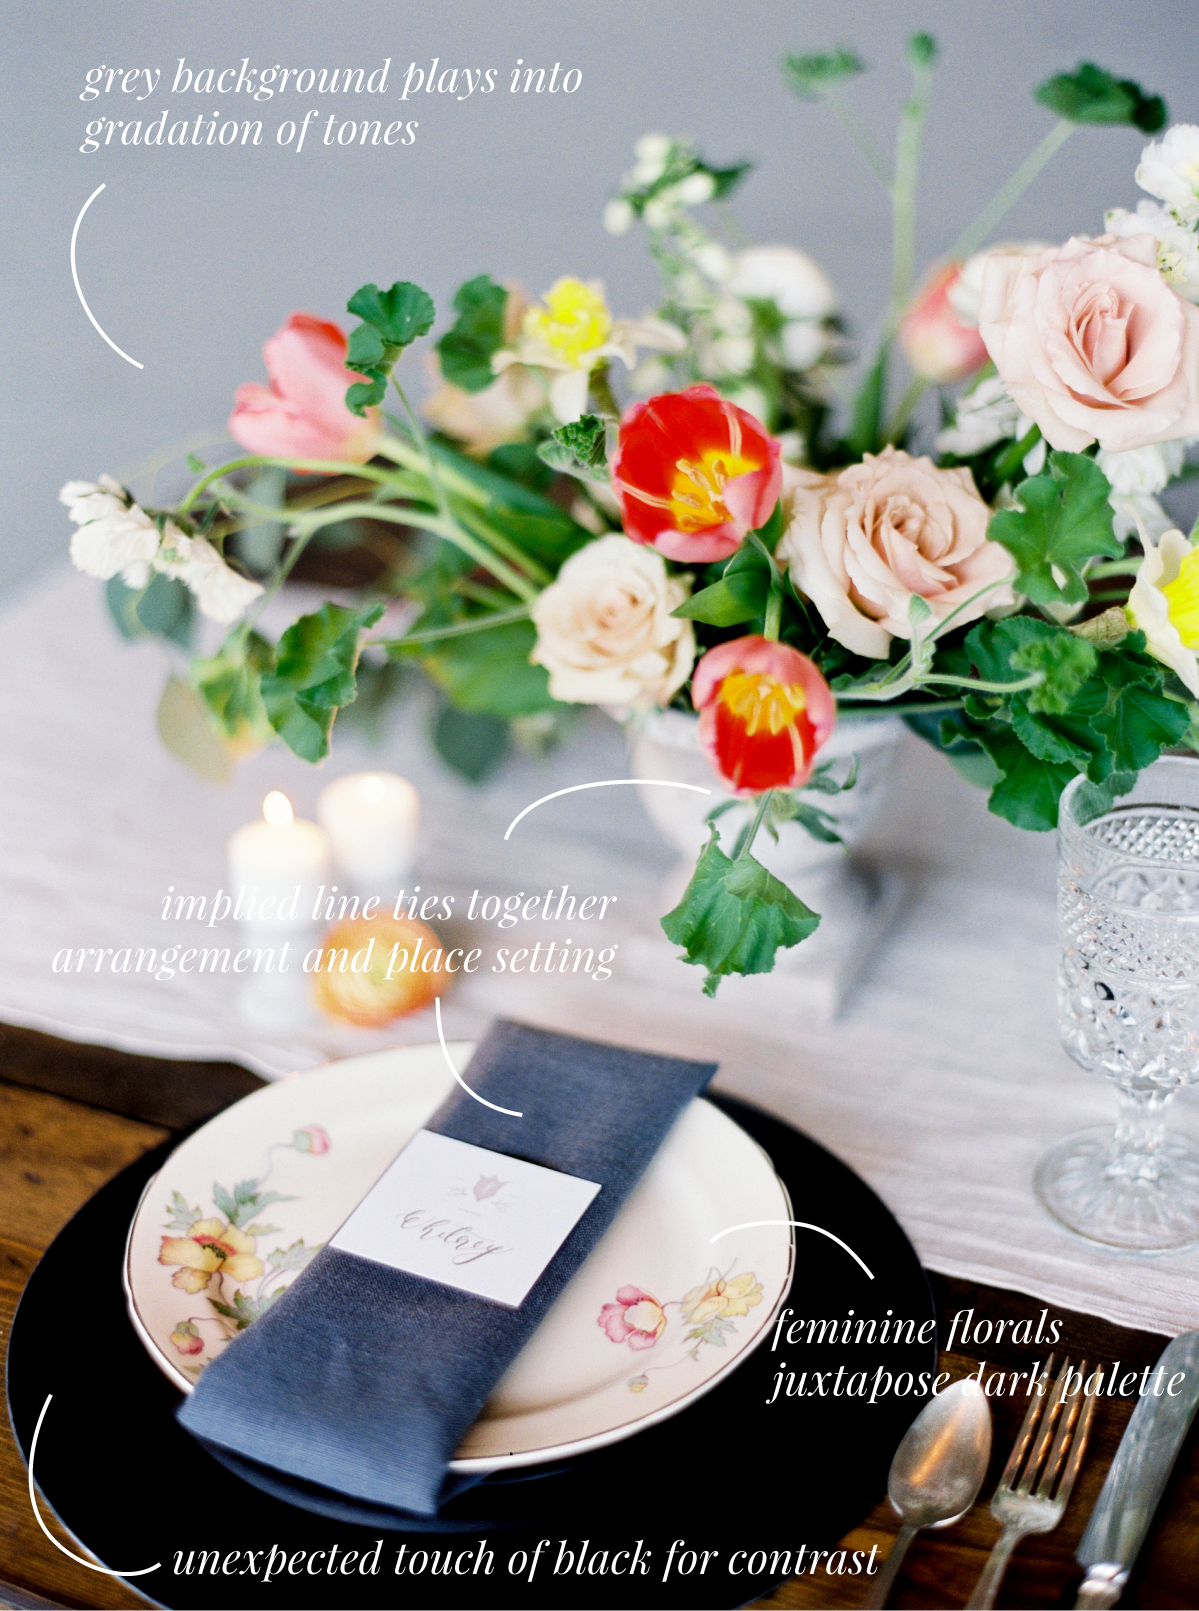  3 Ways to Make Your Tabletop Design Pop | The School of Styling | Love, The Nelsons Photography | www.theschoolofstyling.com 